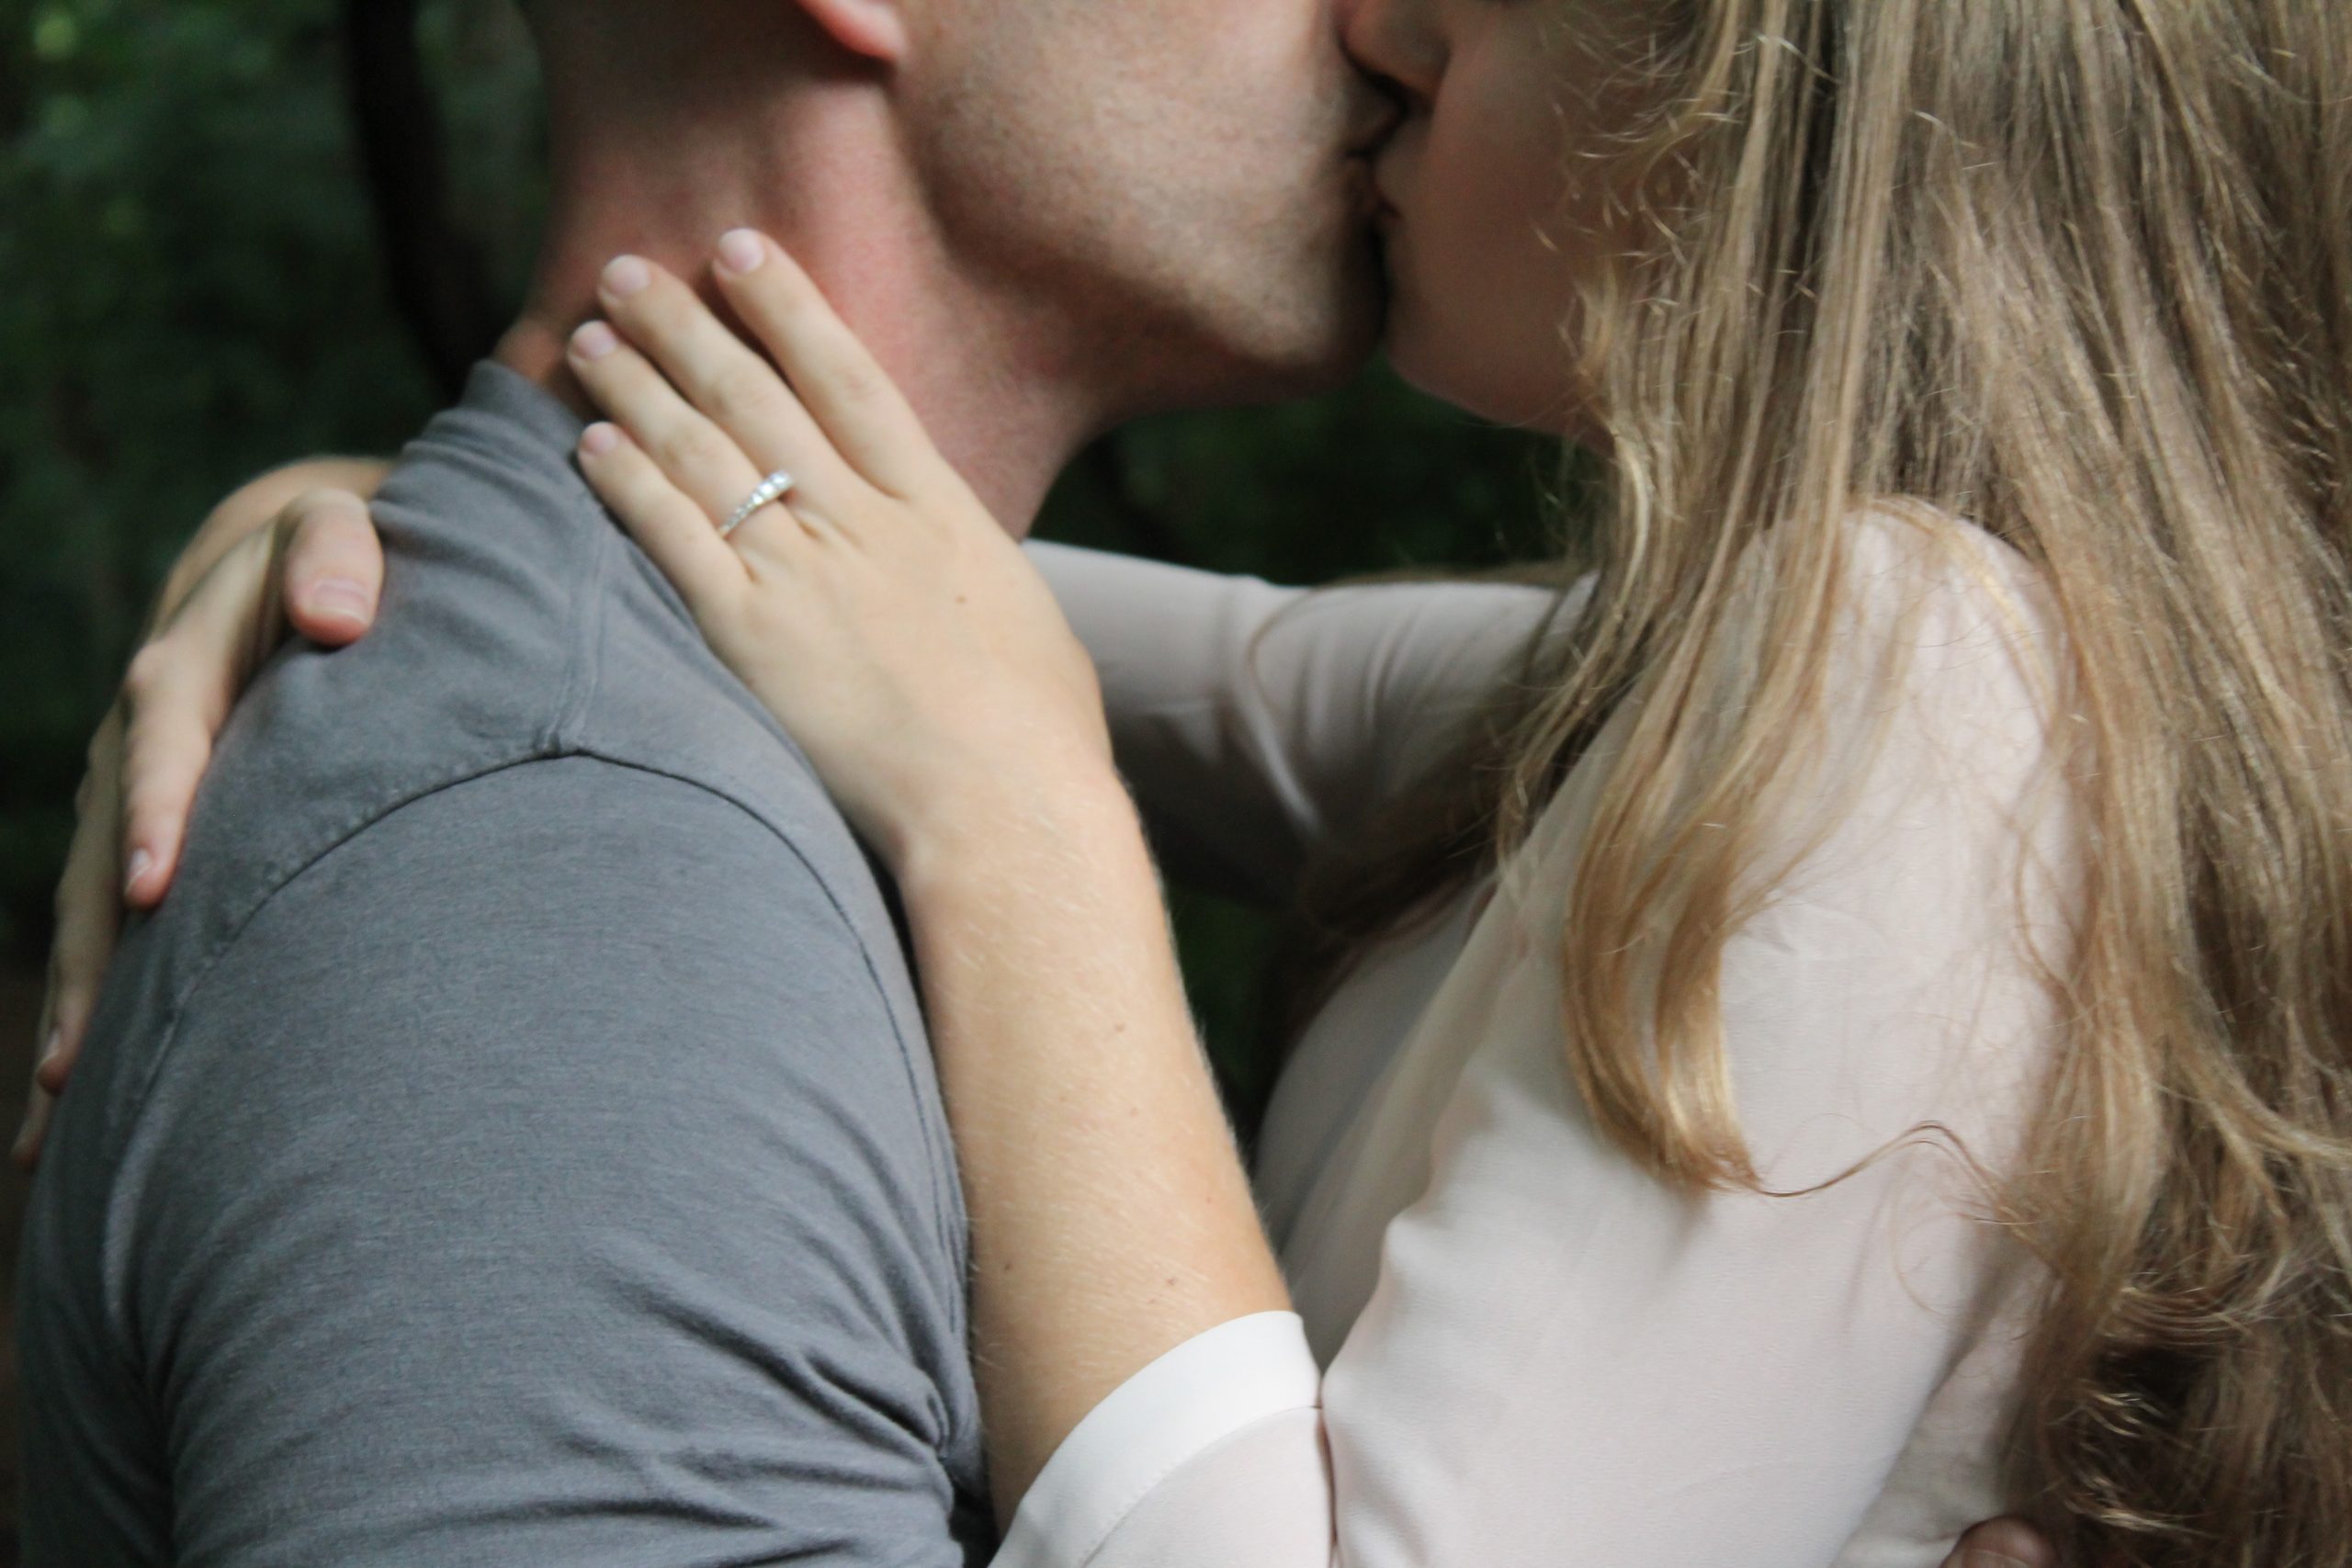 A close-up image of man and woman kissing